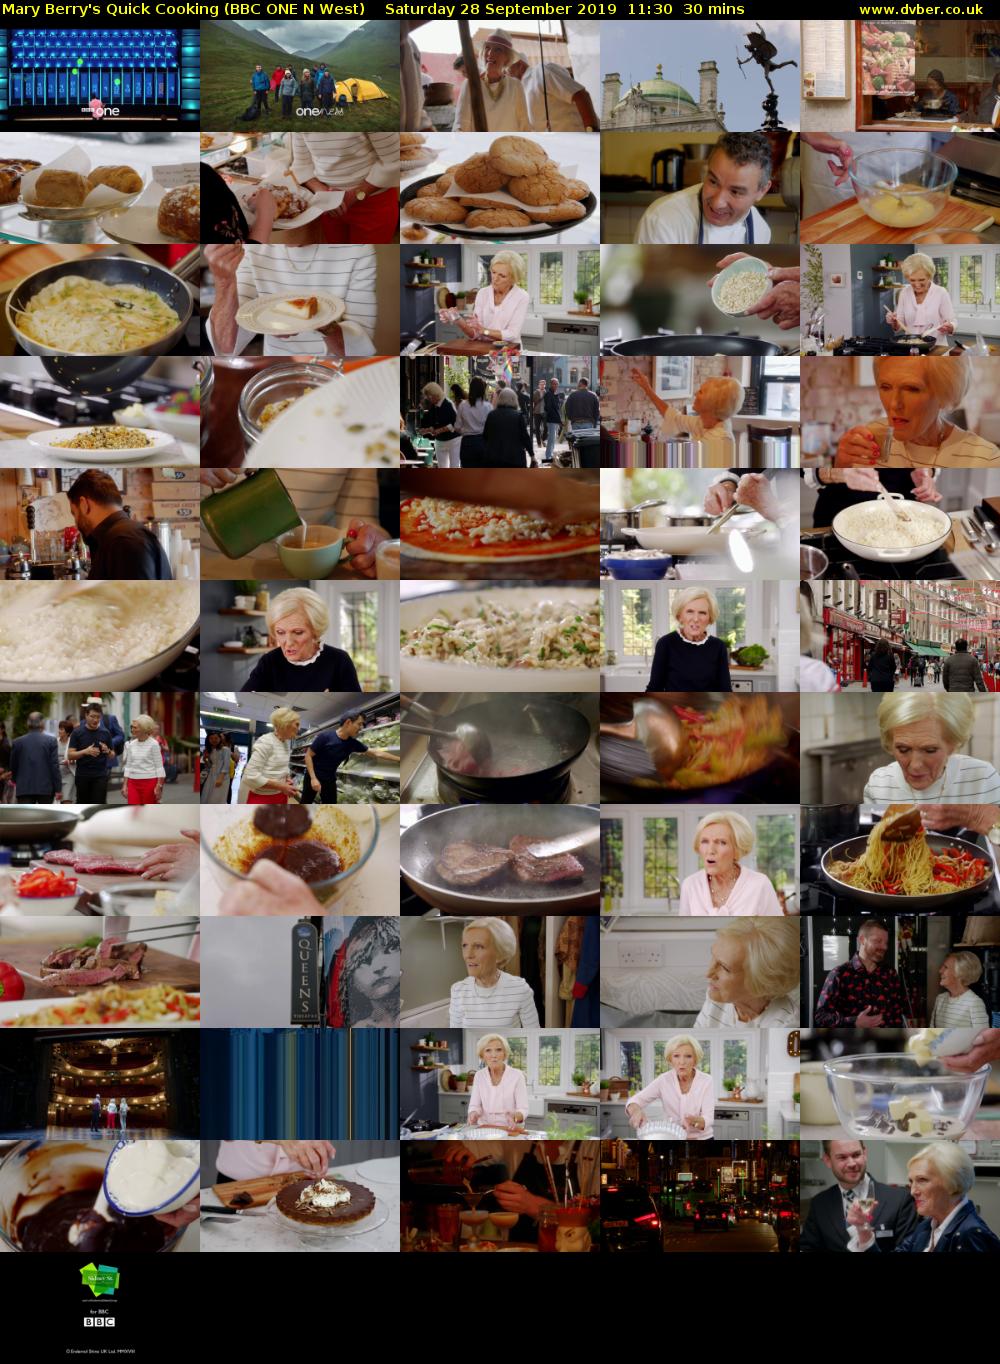 Mary Berry's Quick Cooking (BBC ONE N West) Saturday 28 September 2019 11:30 - 12:00